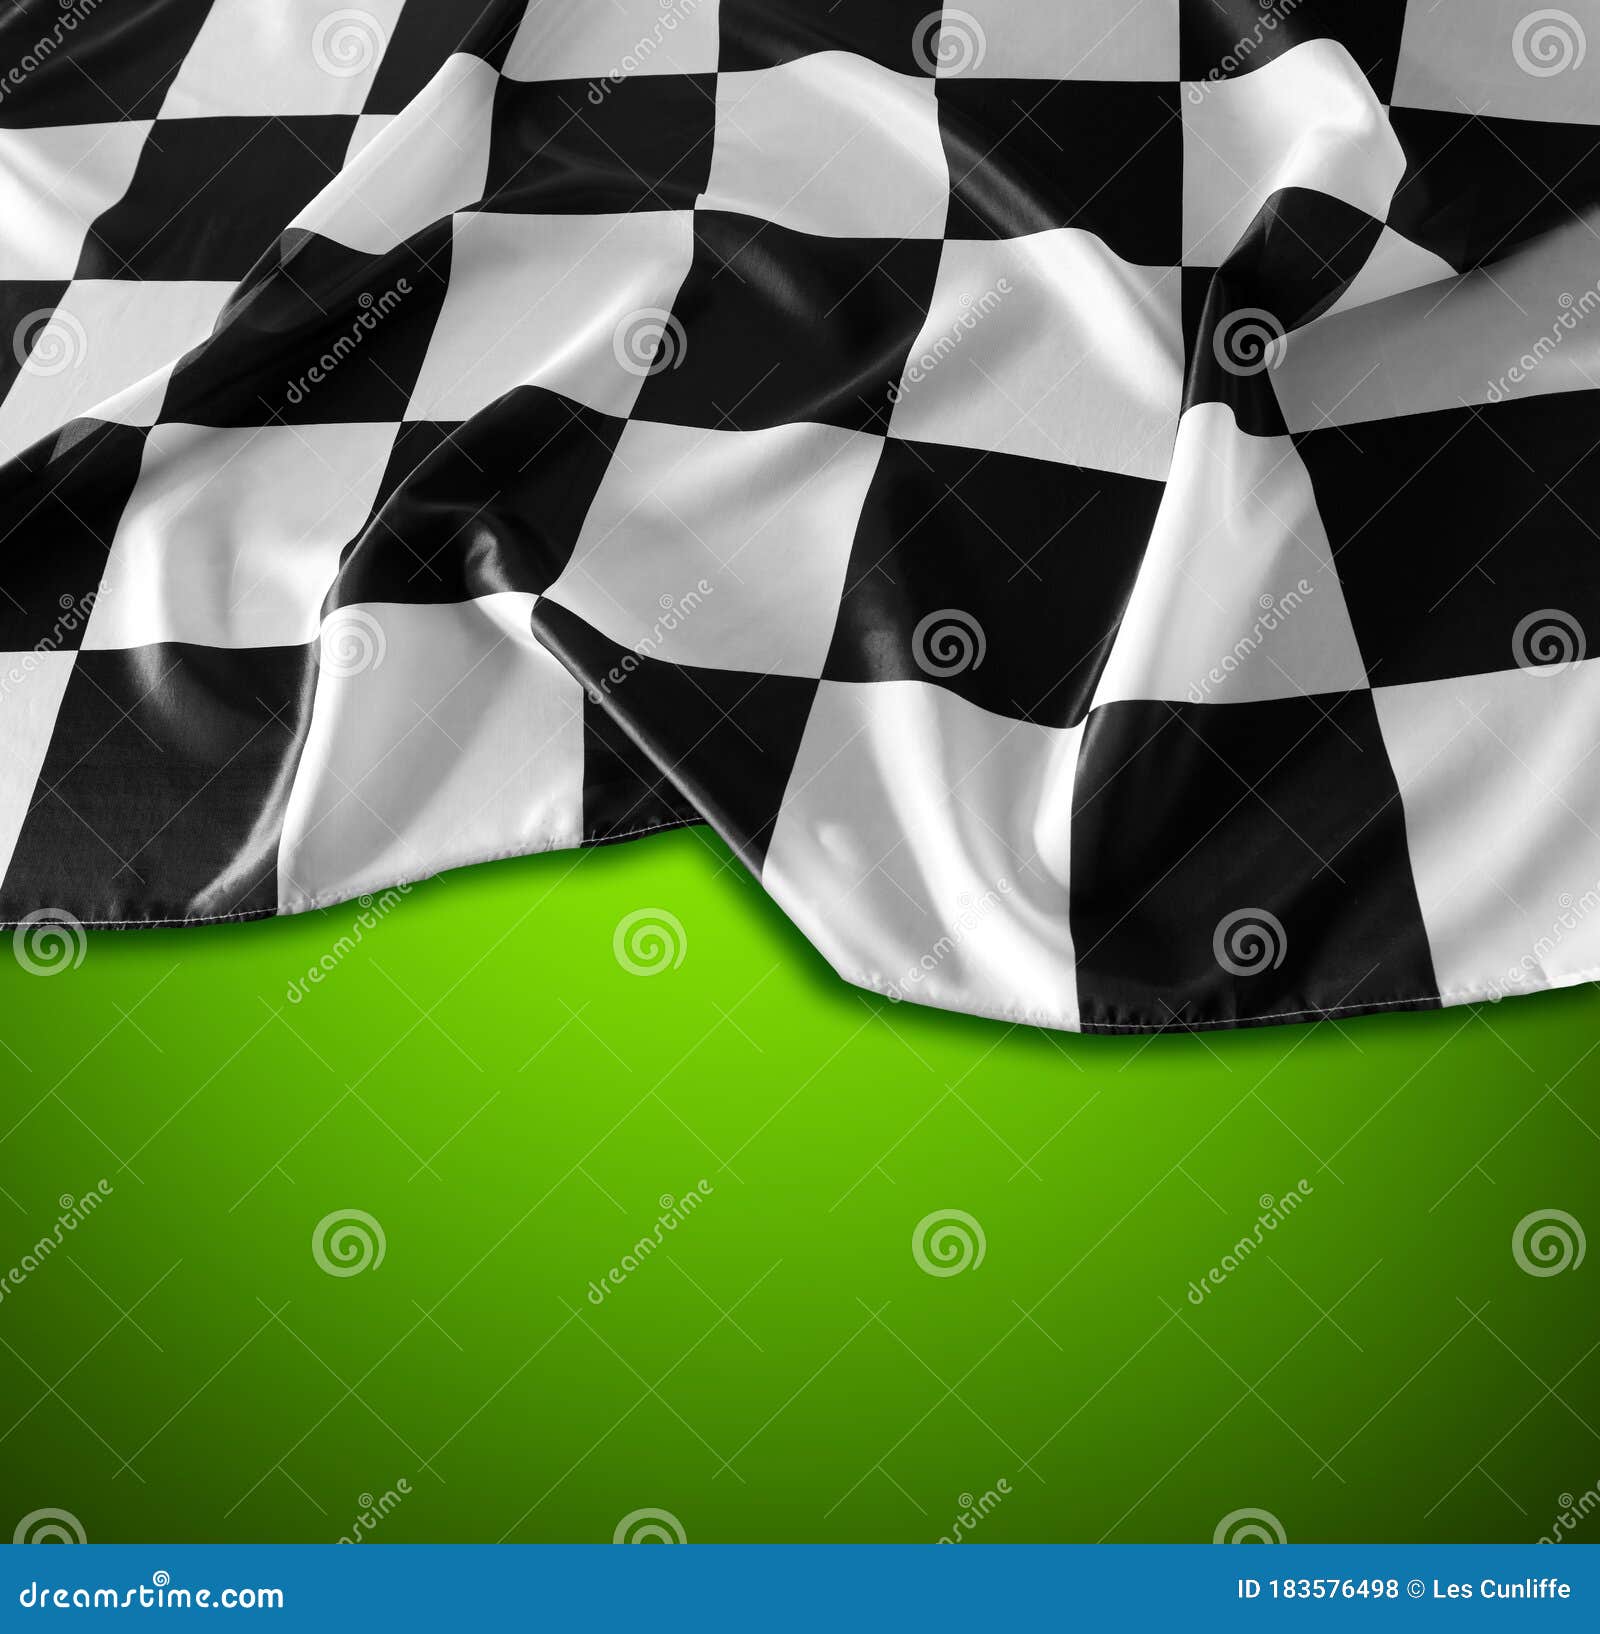 Checkered flag on green stock photo. Image of flagquot - 183576498 Repeating Checkered Flag Background